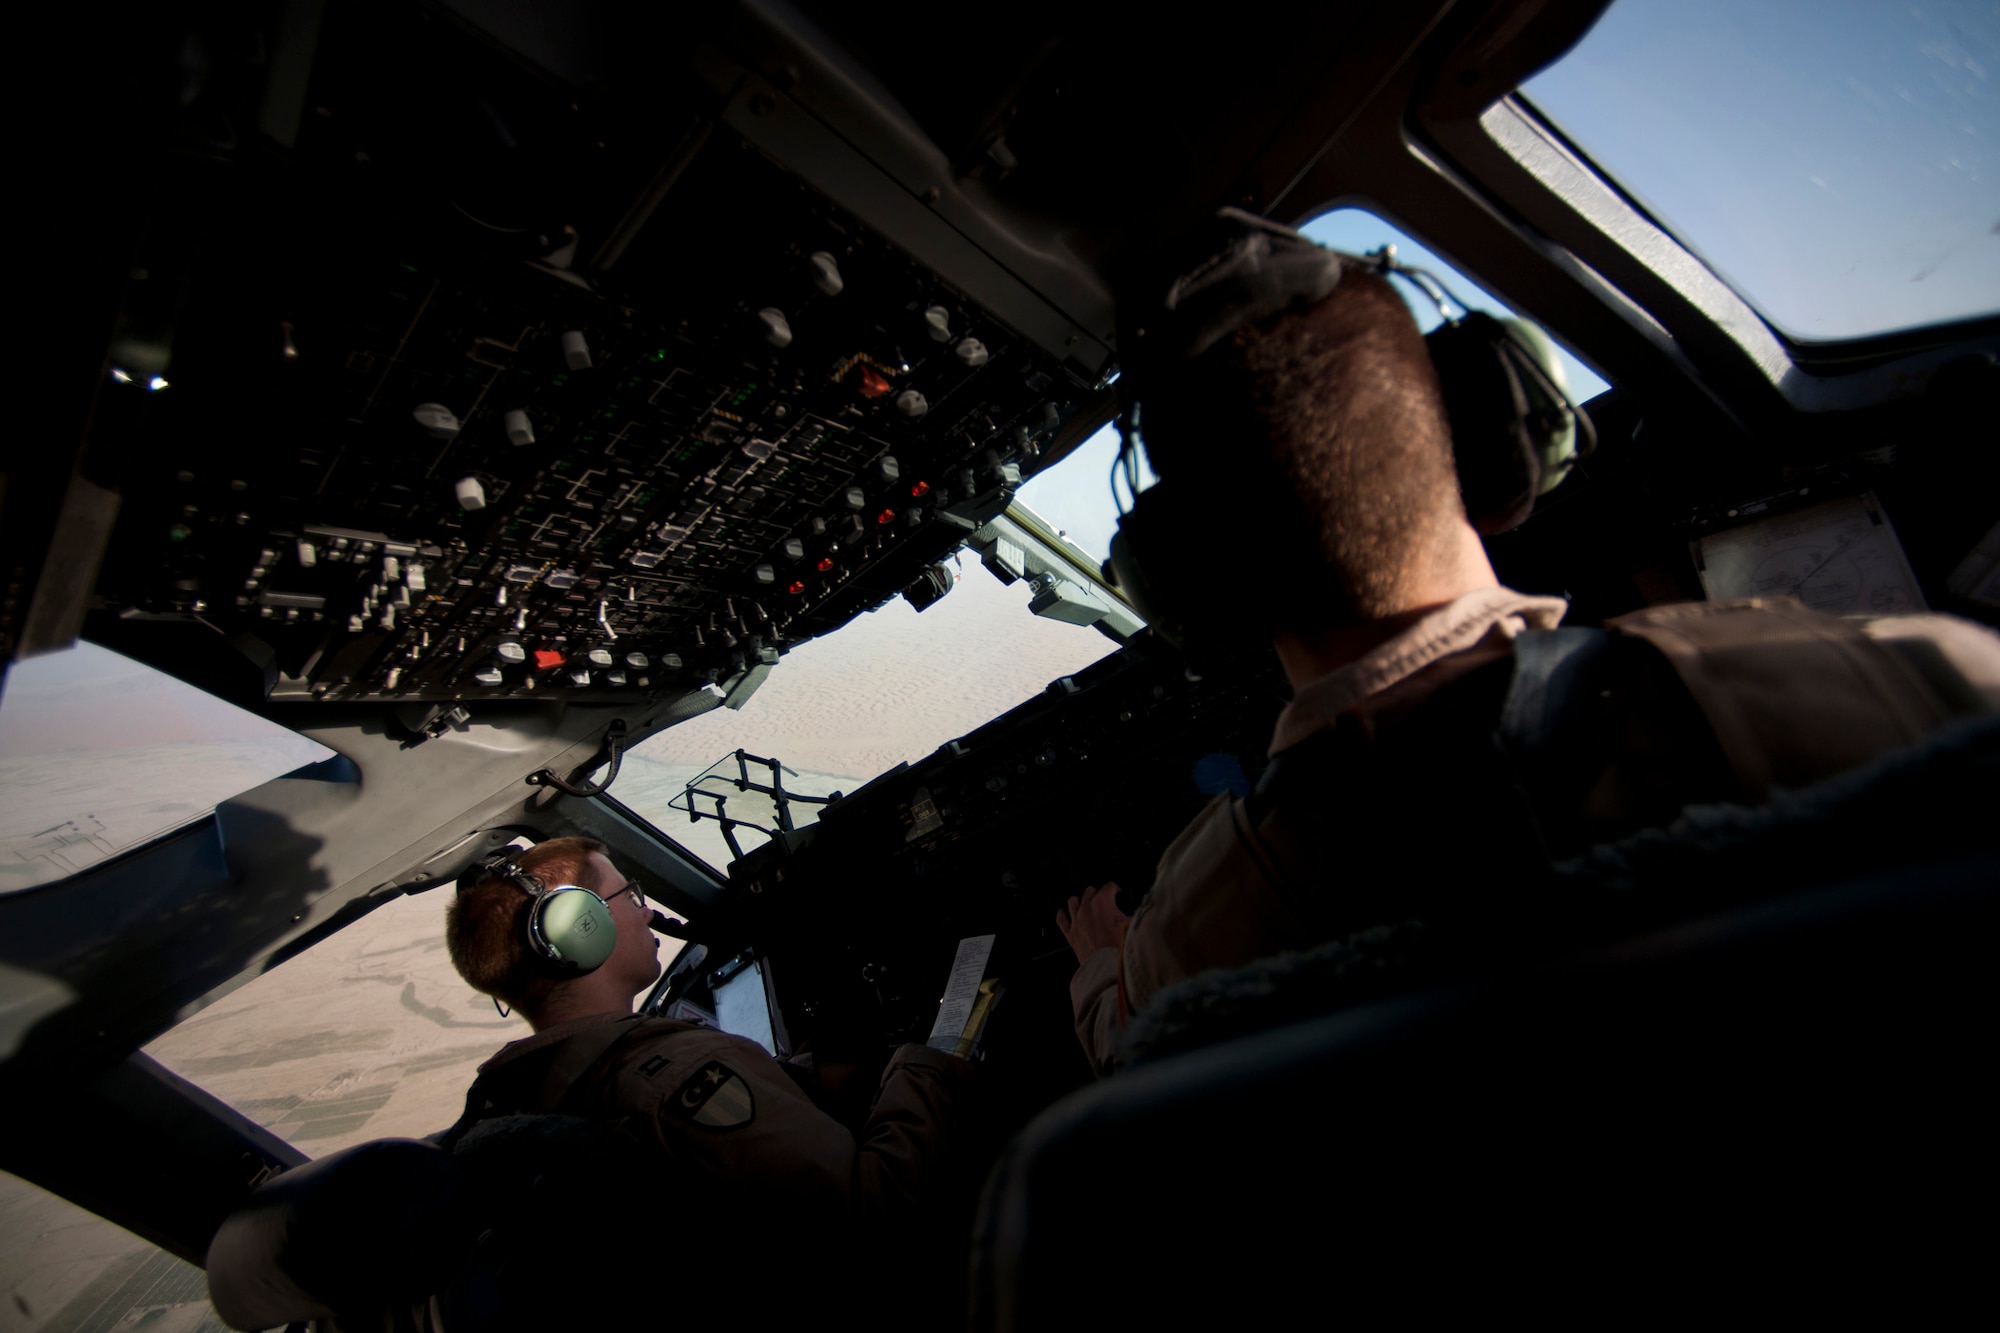 Capts. Matt Hammerle, left, and Eric Bowers, 817th Expeditionary Airlift Squadron pilots, takeoff in a C-17 Globemaster III aircraft Aug. 18, 2011, at Kandahar Air Field, Afghanistan. The crew transported equipment and supplies from Incirlik Air Base, Turkey. (U.S. Air Force photo by Tech. Sgt. Michael B. Keller/Released)